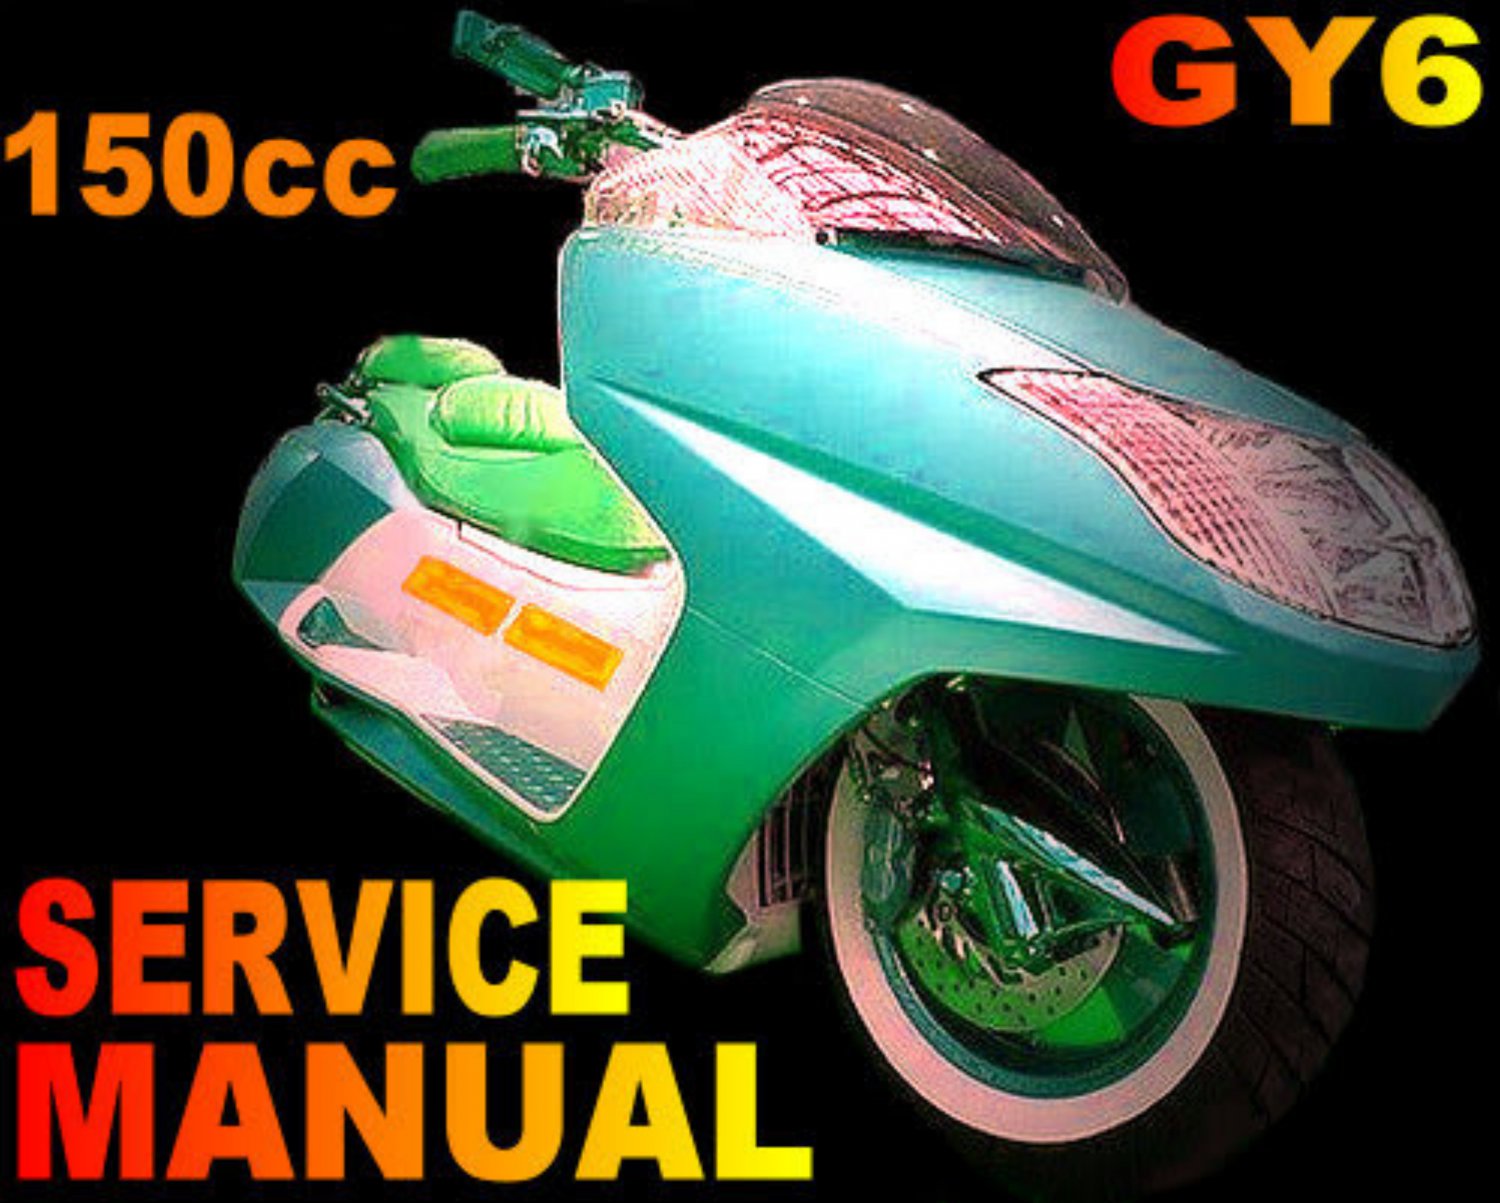 Chinese Scooter 50cc GY6 Service Repair Shop Manual on CD VENTO LIFAN ROKETA JCL 